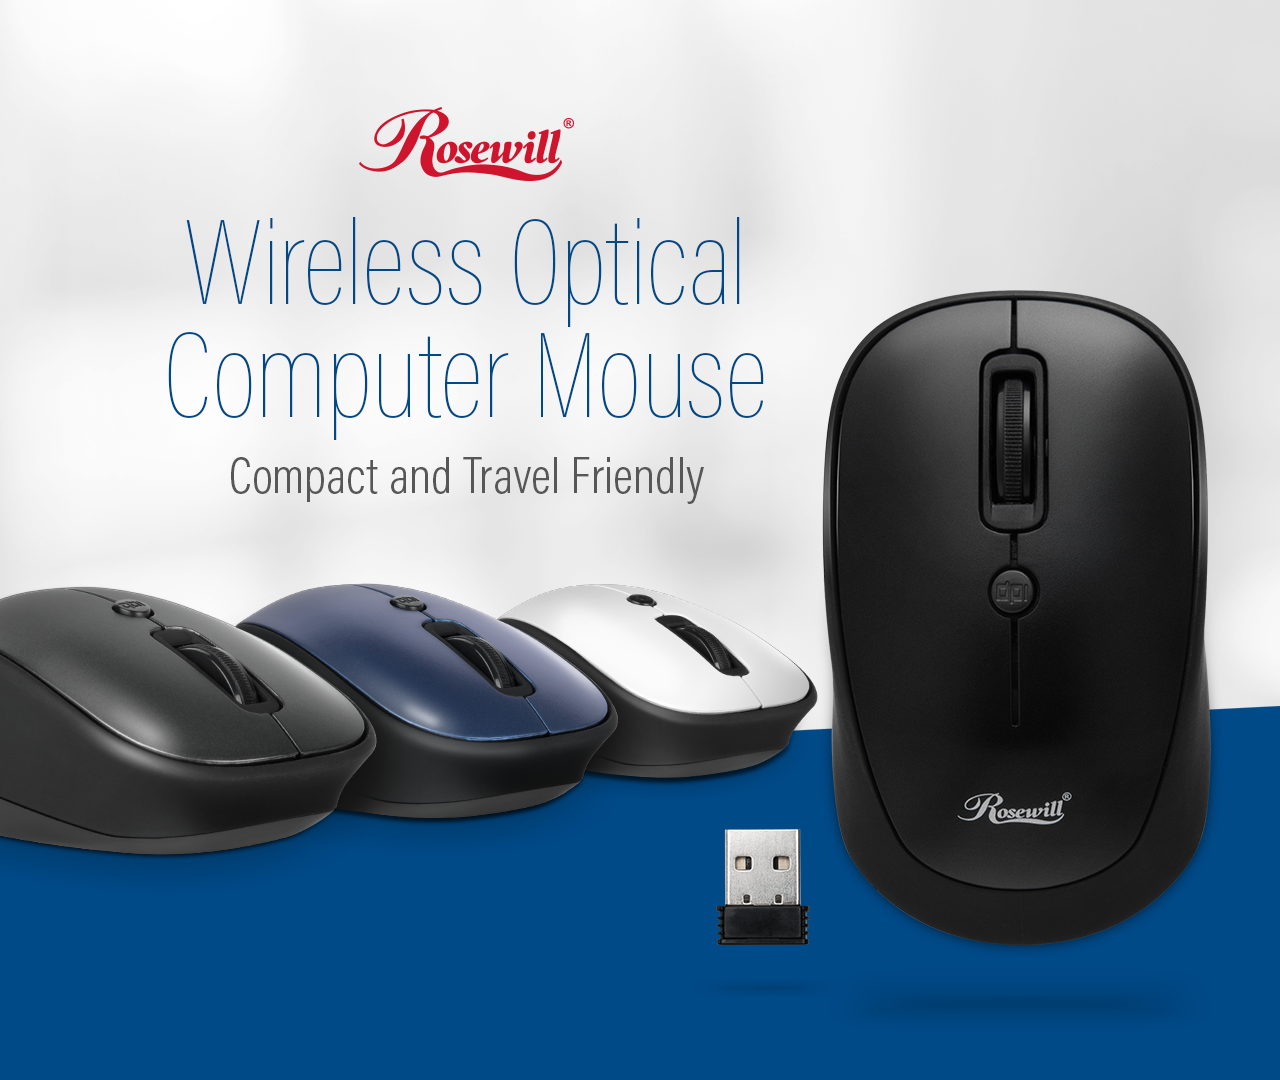 Rosewill Wireless Optical Computer Mouse banner showing the black, blue and white models, lying flat angled to the right and a black model facing up next to its USB receiver. There is also text that reads: Wireless Optical Computer Mouse - Compact and Travel Friendly